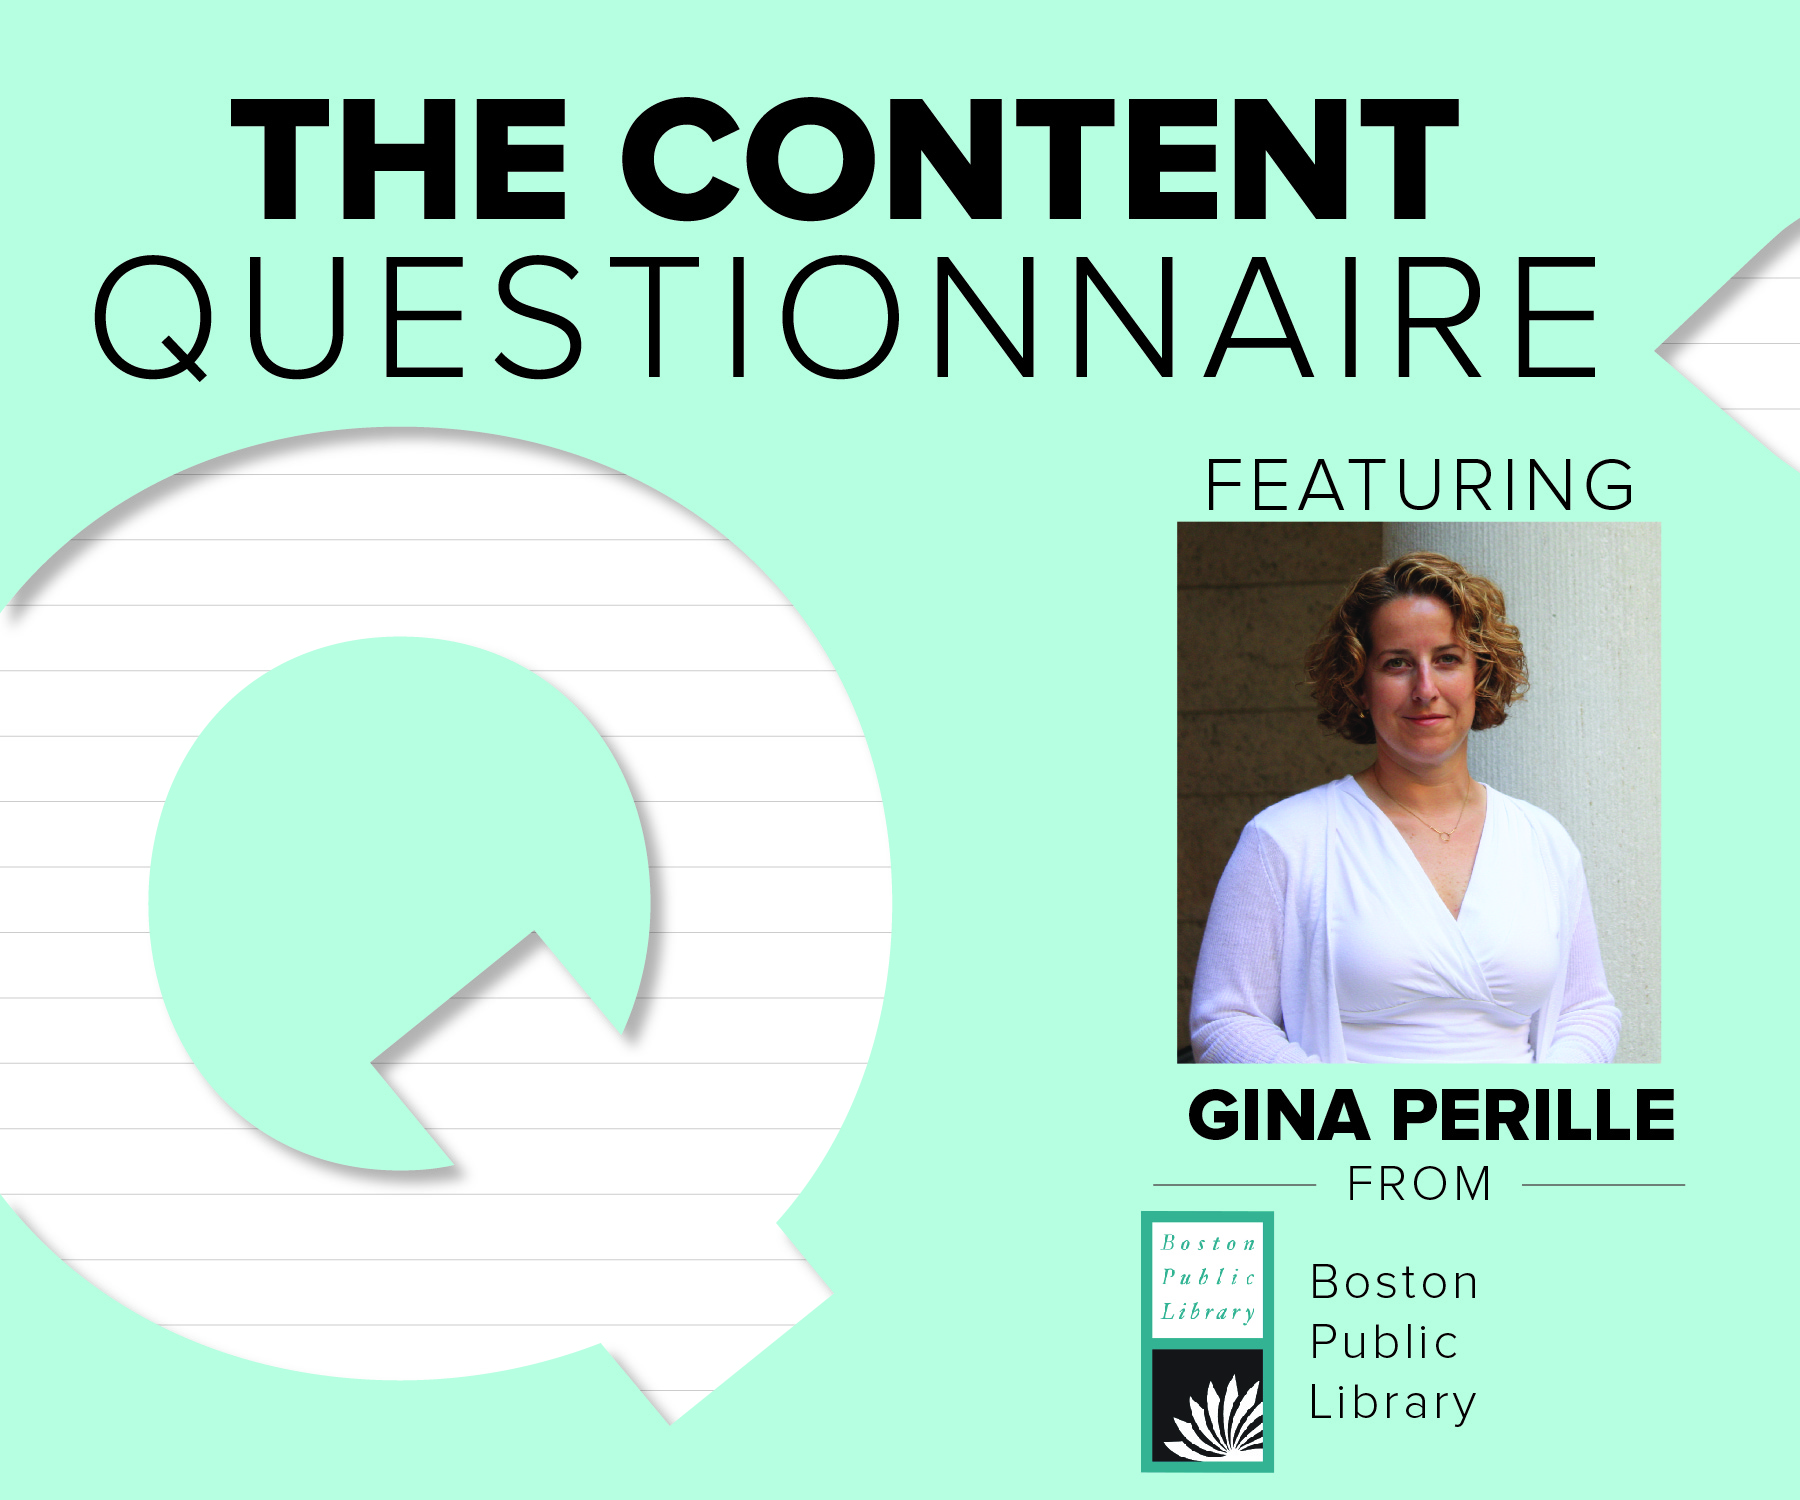 In this week's Content Questionnaire, Gina Perille tells us about her challenges as a digital marketing leader for the Boston Public Library.